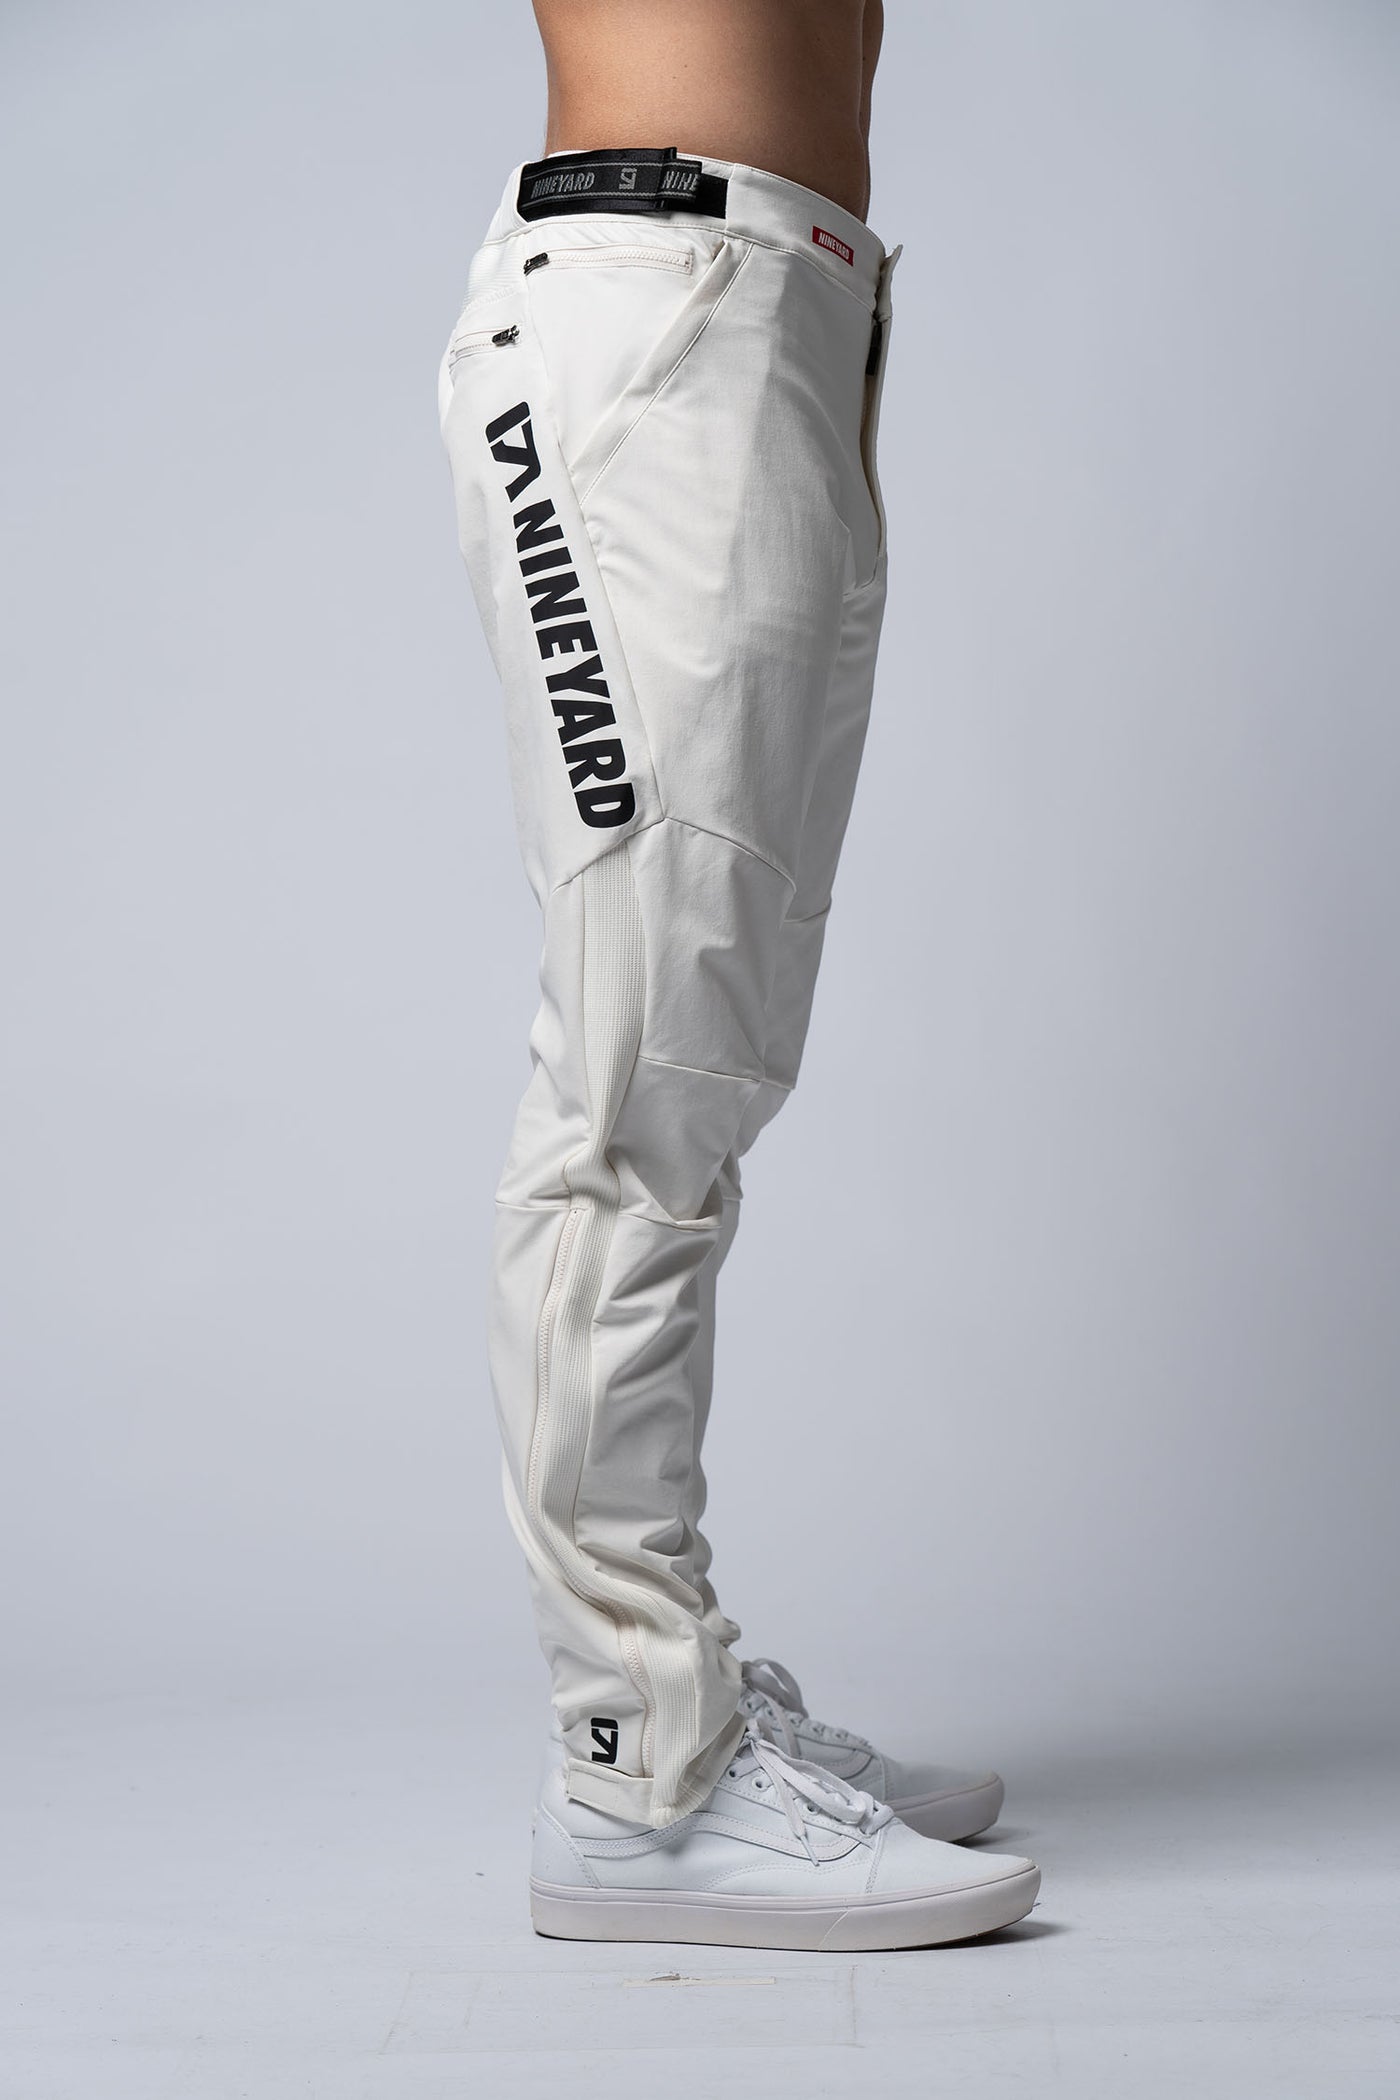 RAW Riding Pants off-white - WITH LOGO